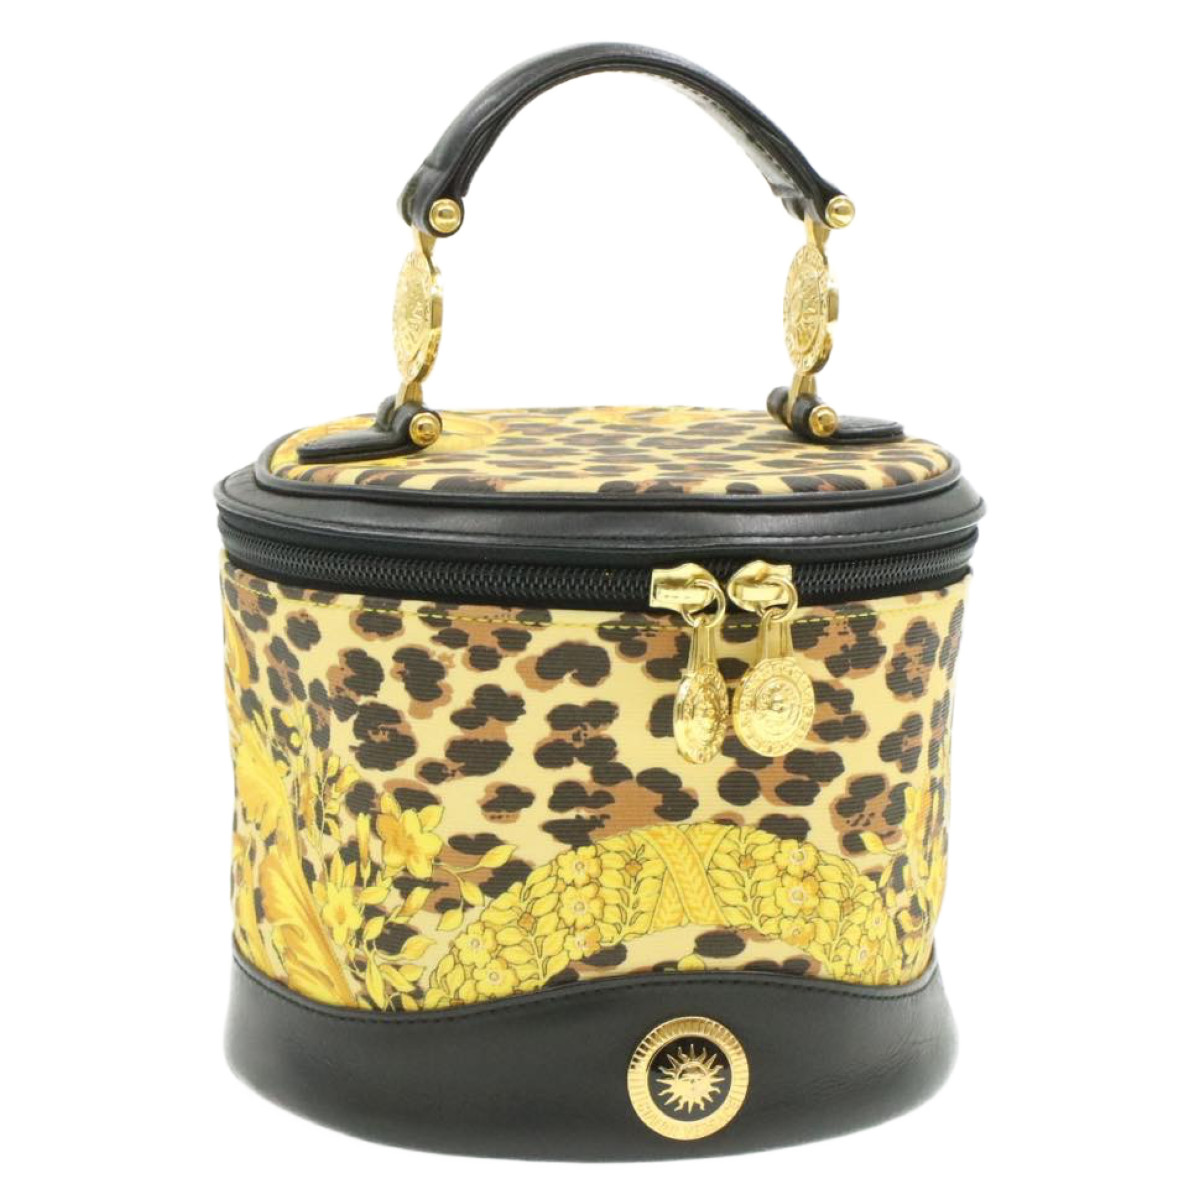 GIANNI VERSACE Sun Face Vanity Hand Bag Black Yellow PVC Leather Auth ...